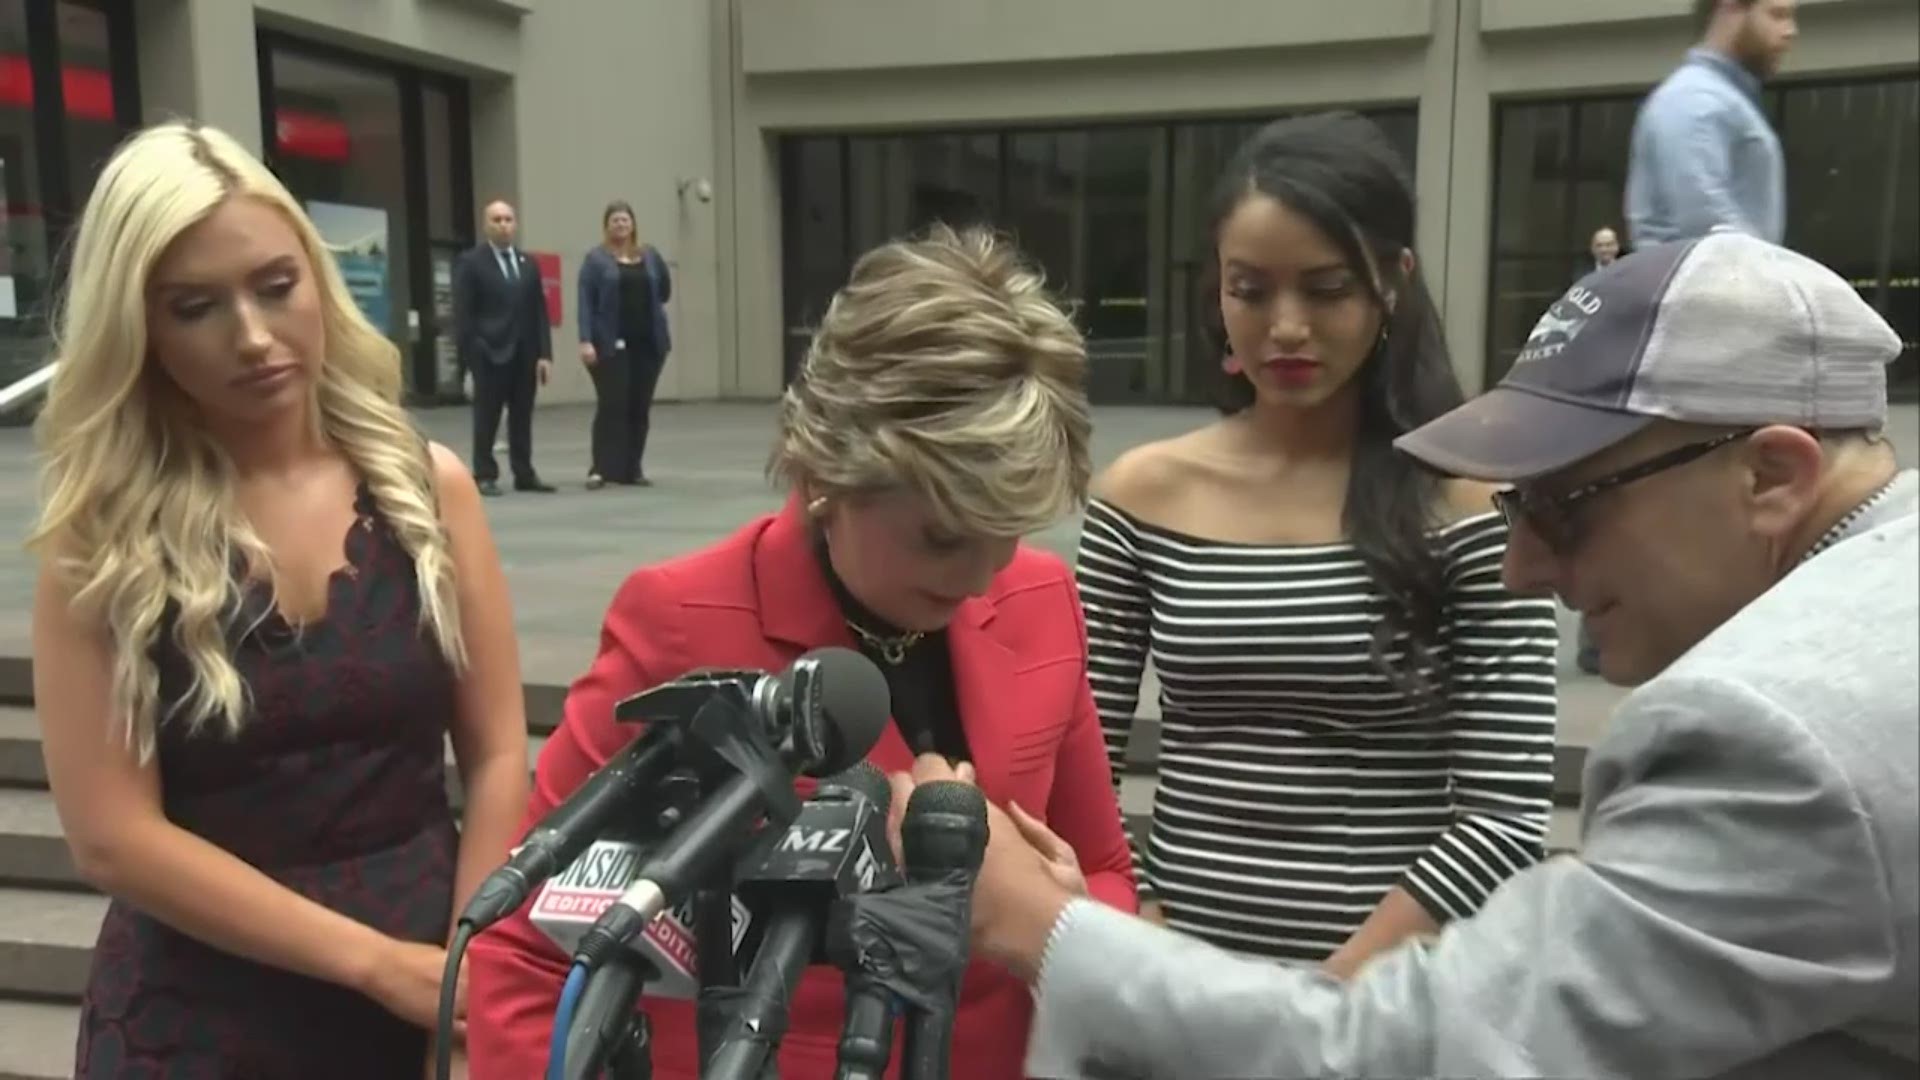 Angelina Rosa says her body was duct-taped at a game because she was considered "skinny fat." She joined her lawyer Gloria Allred at a press conference at NFL headquarters in New York Friday morning.